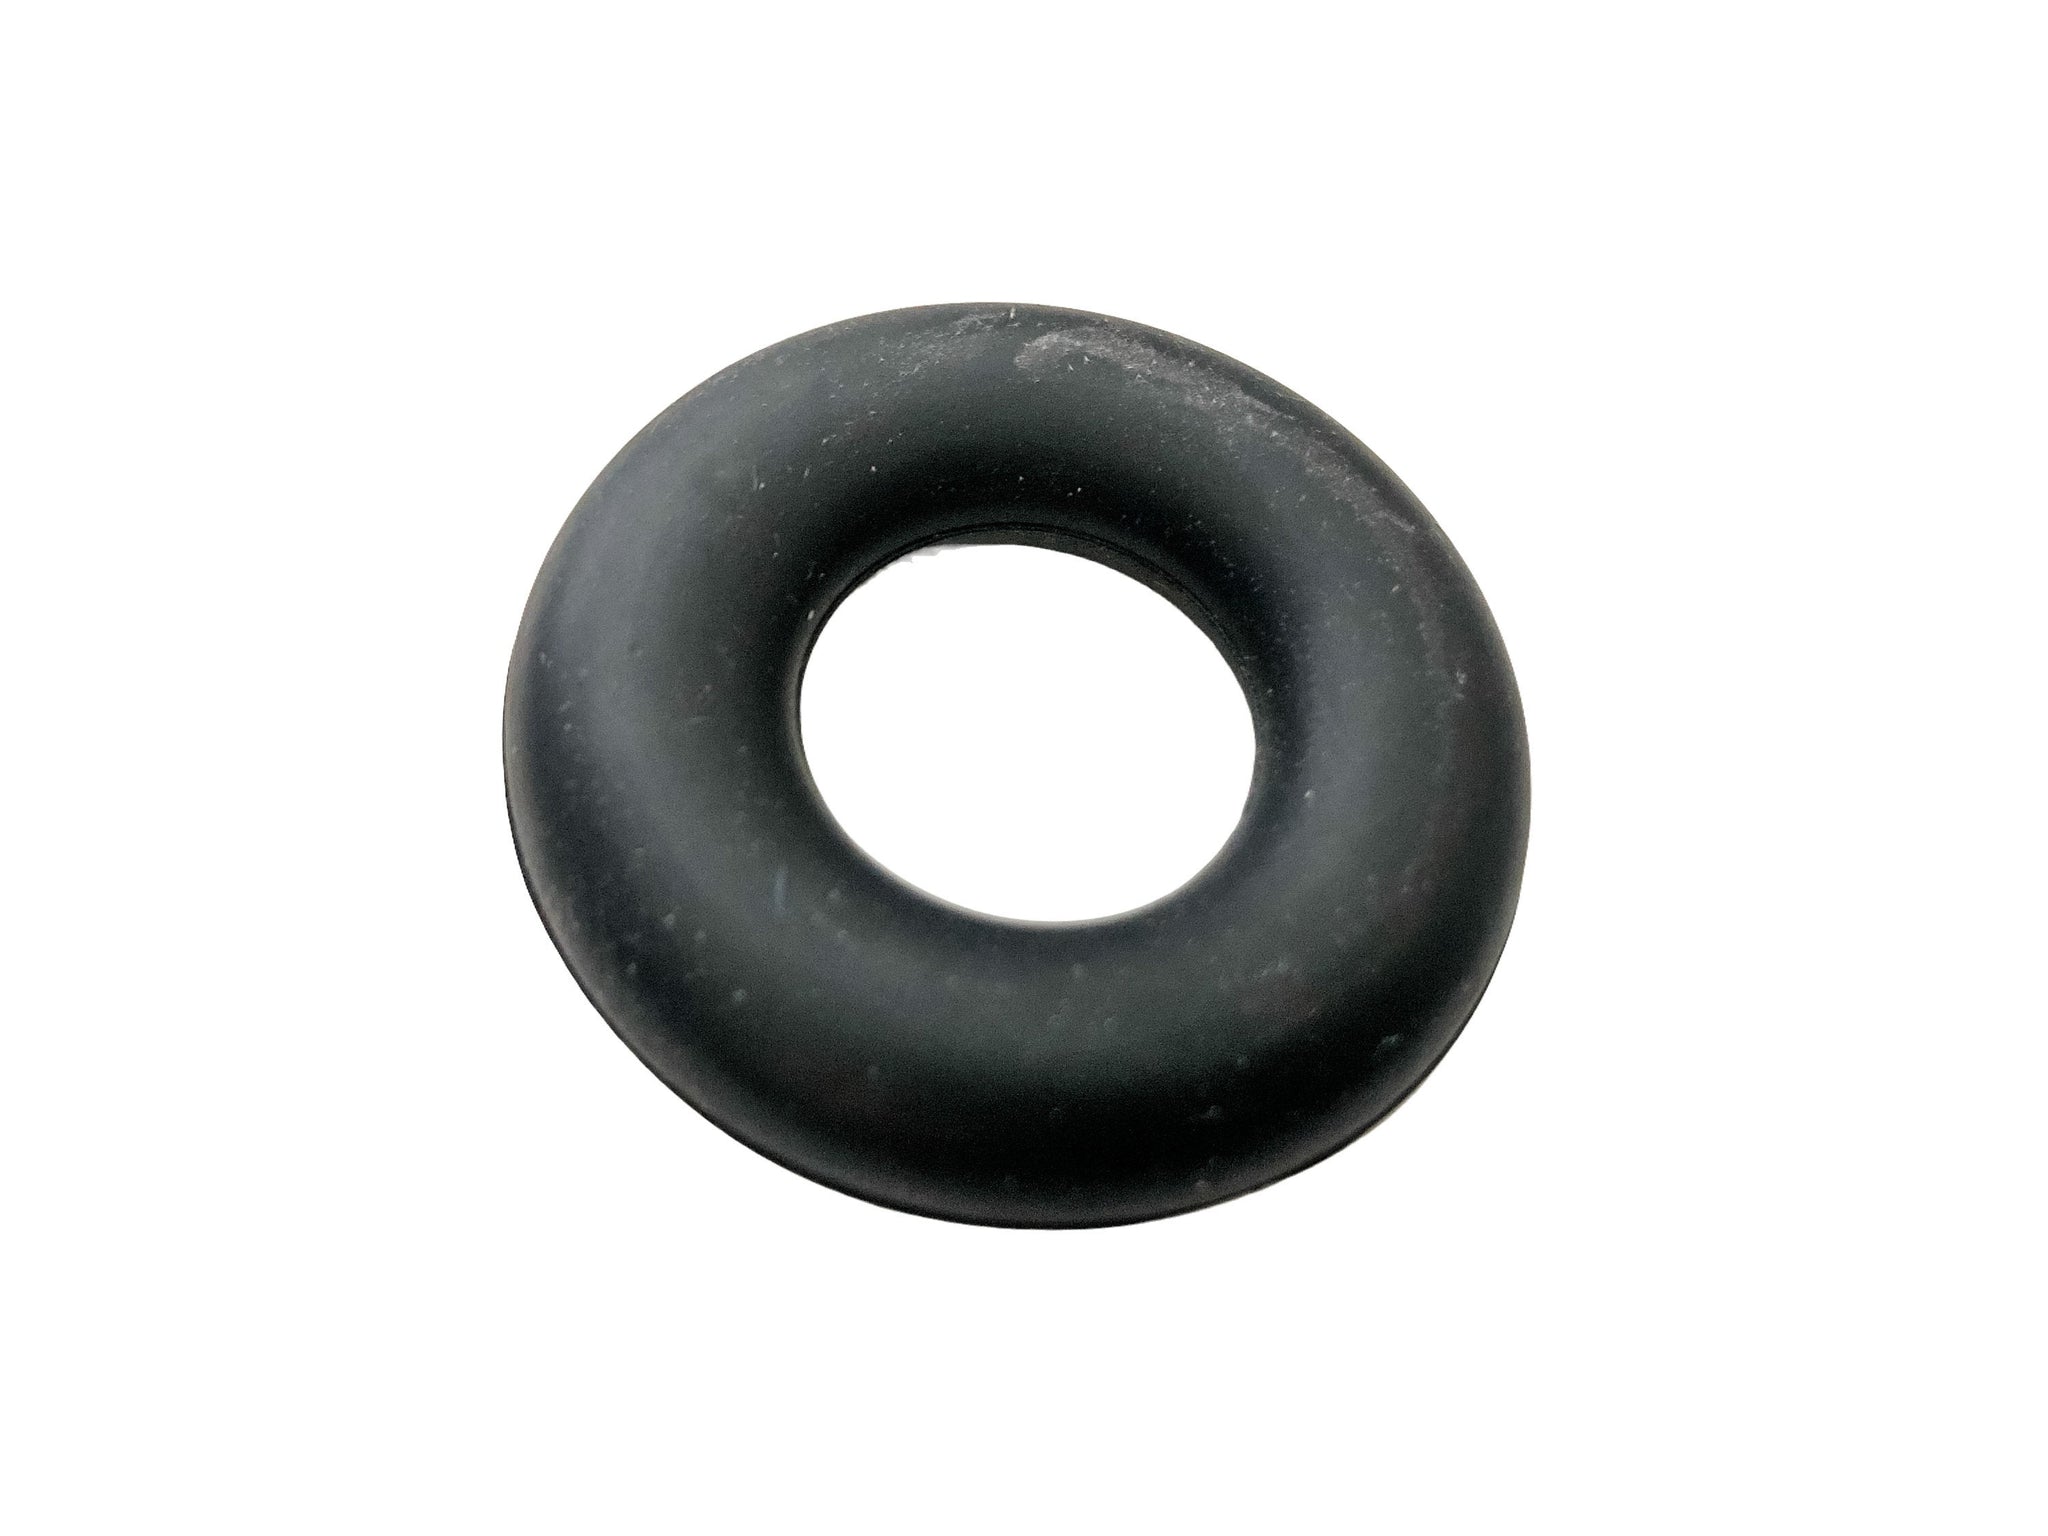 Black Silicone Ring Beads Pendant - Seamless Silicone Donut Beads